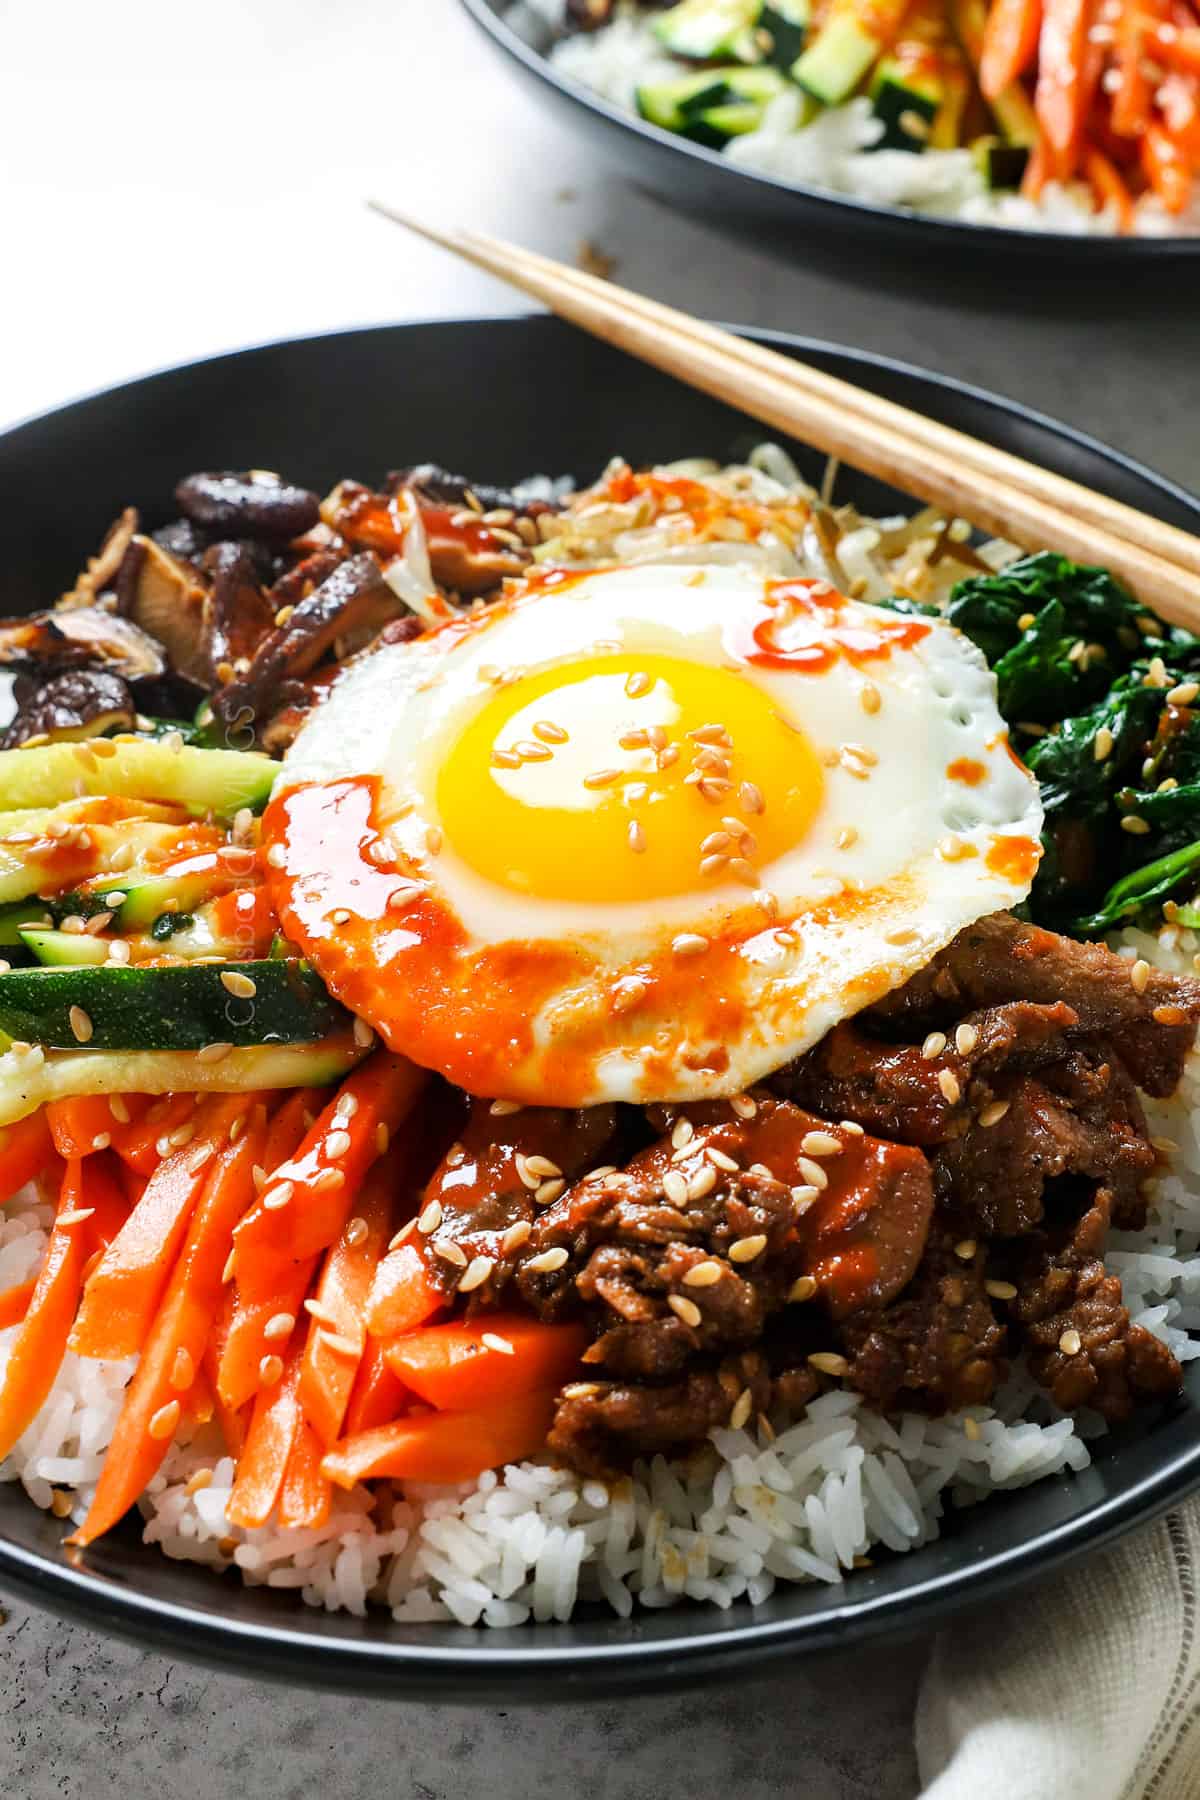 showing how to assemble bibimbap by adding carrots, zucchini, mushrooms, spinach, beef and egg to a bowl of rice